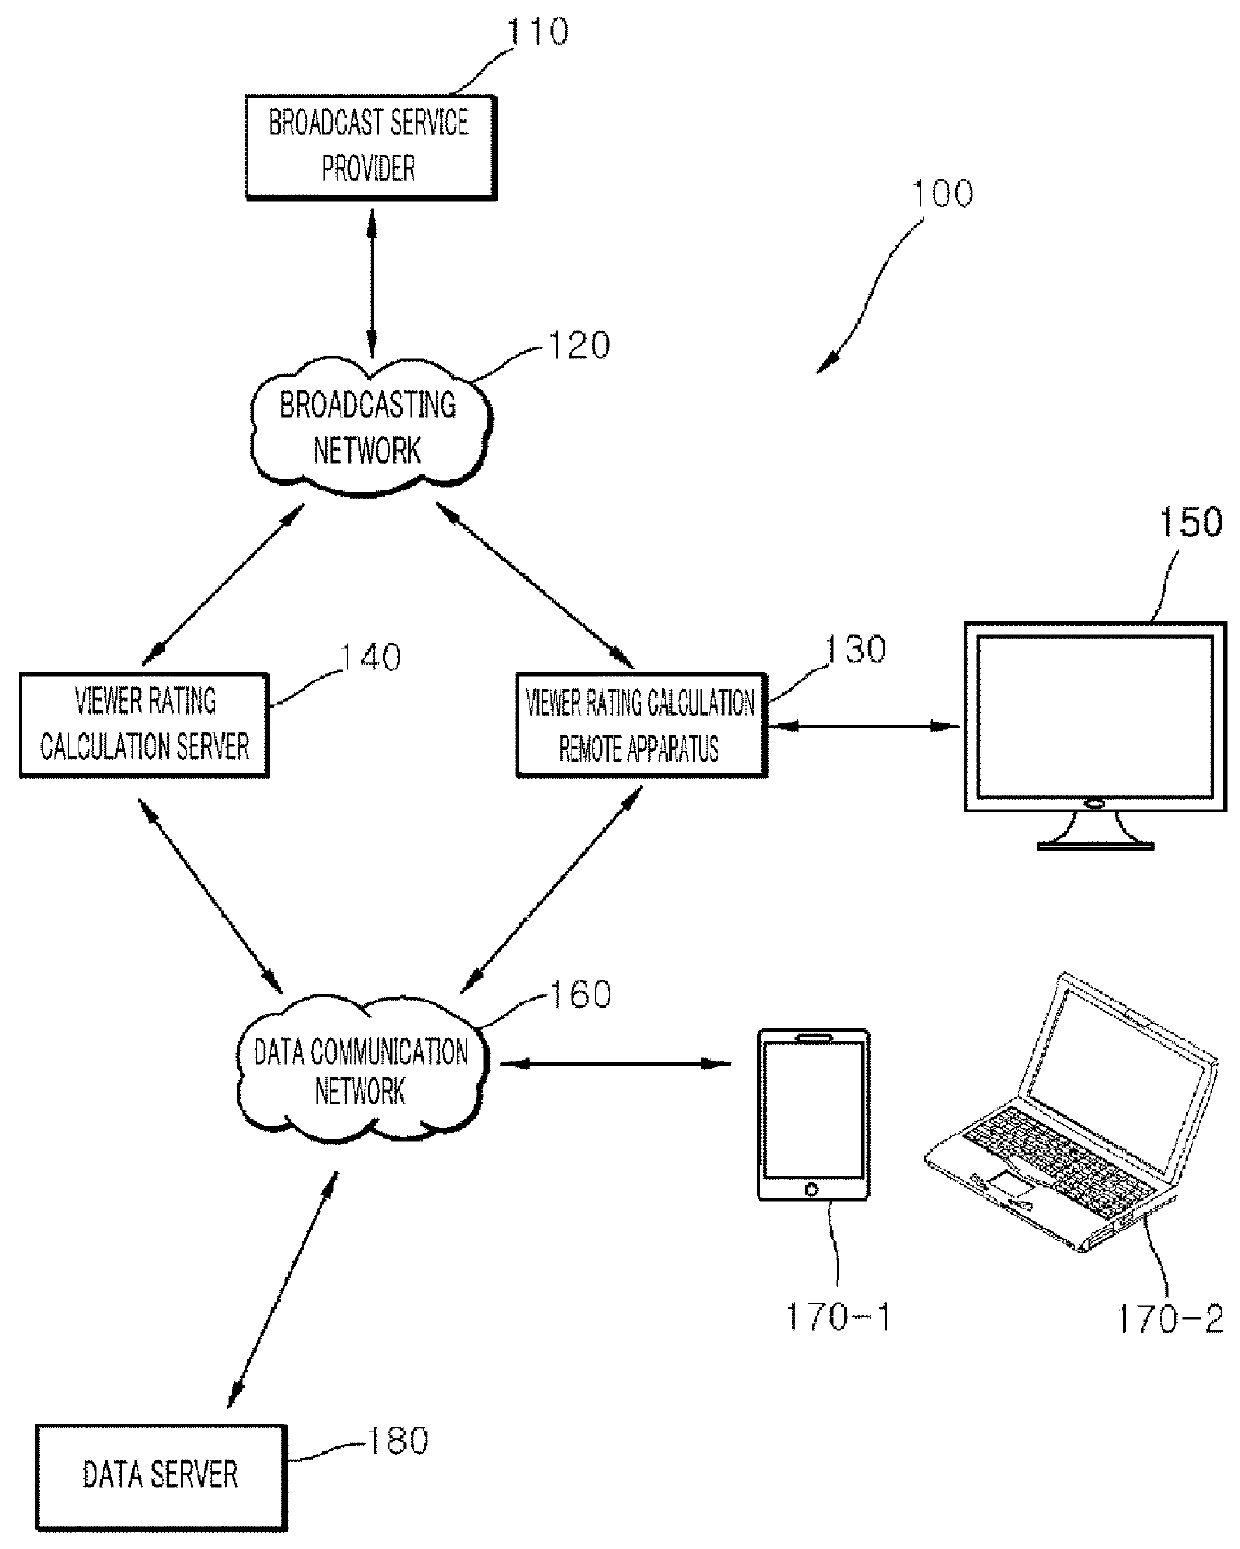 Viewer rating calculation server, method for calculating viewer rating, and viewer rating calculation remote apparatus